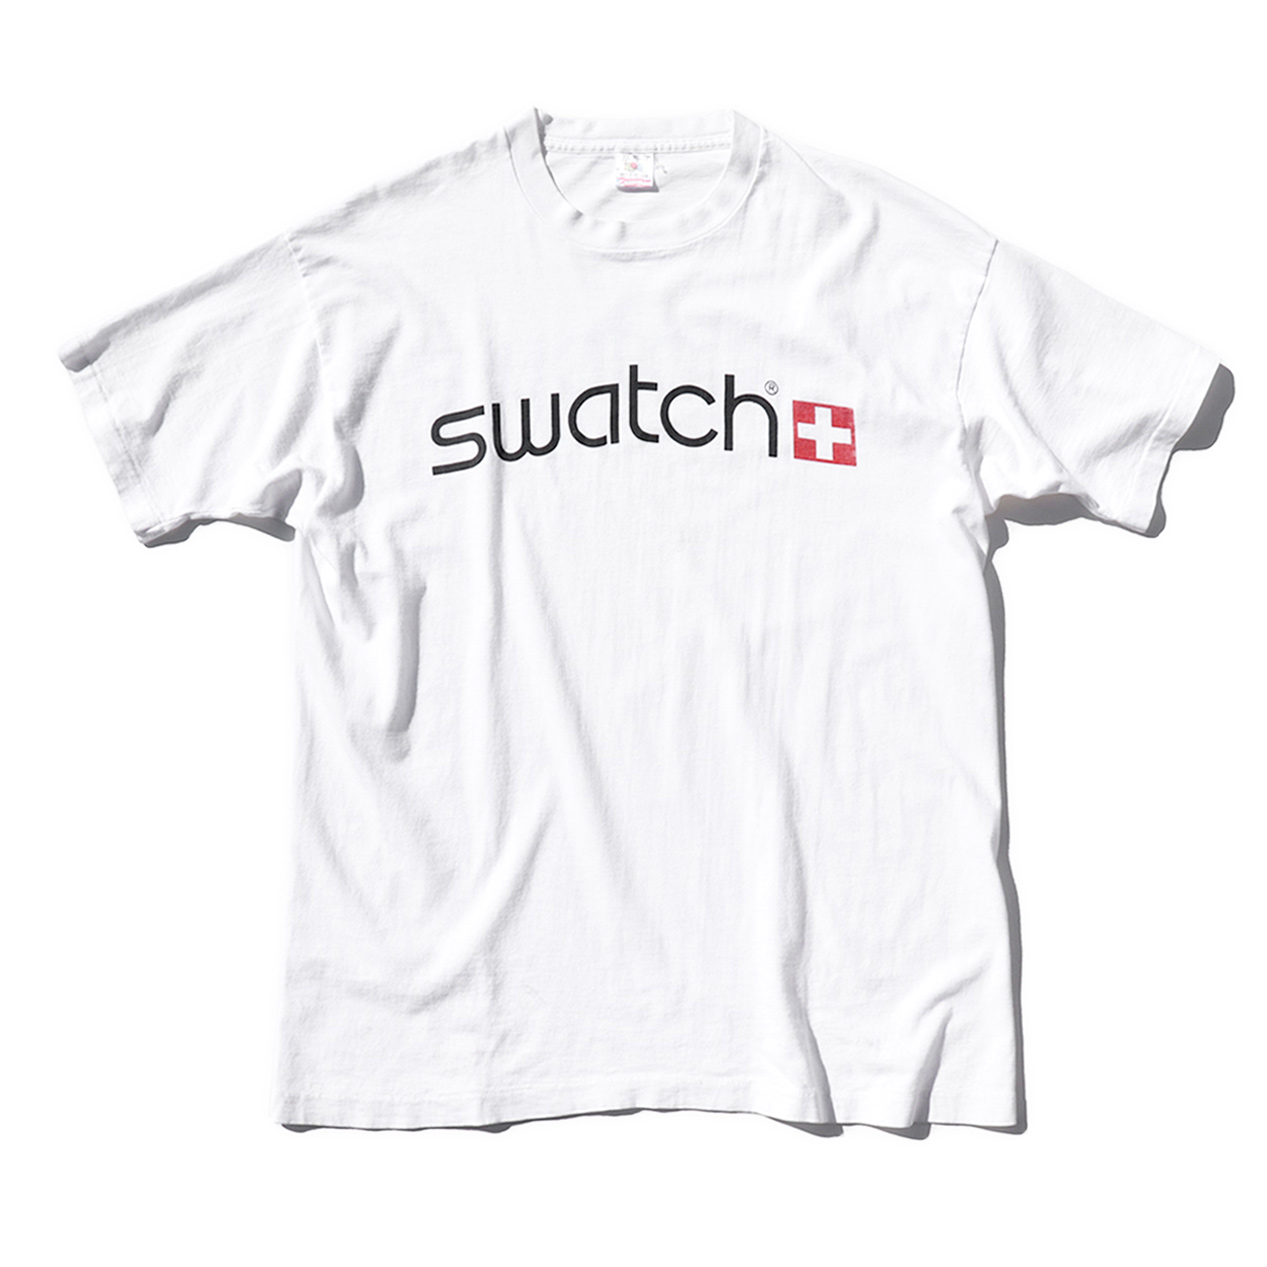 POST JUNK / 90's SWATCH USA製 Tシャツ [XL]